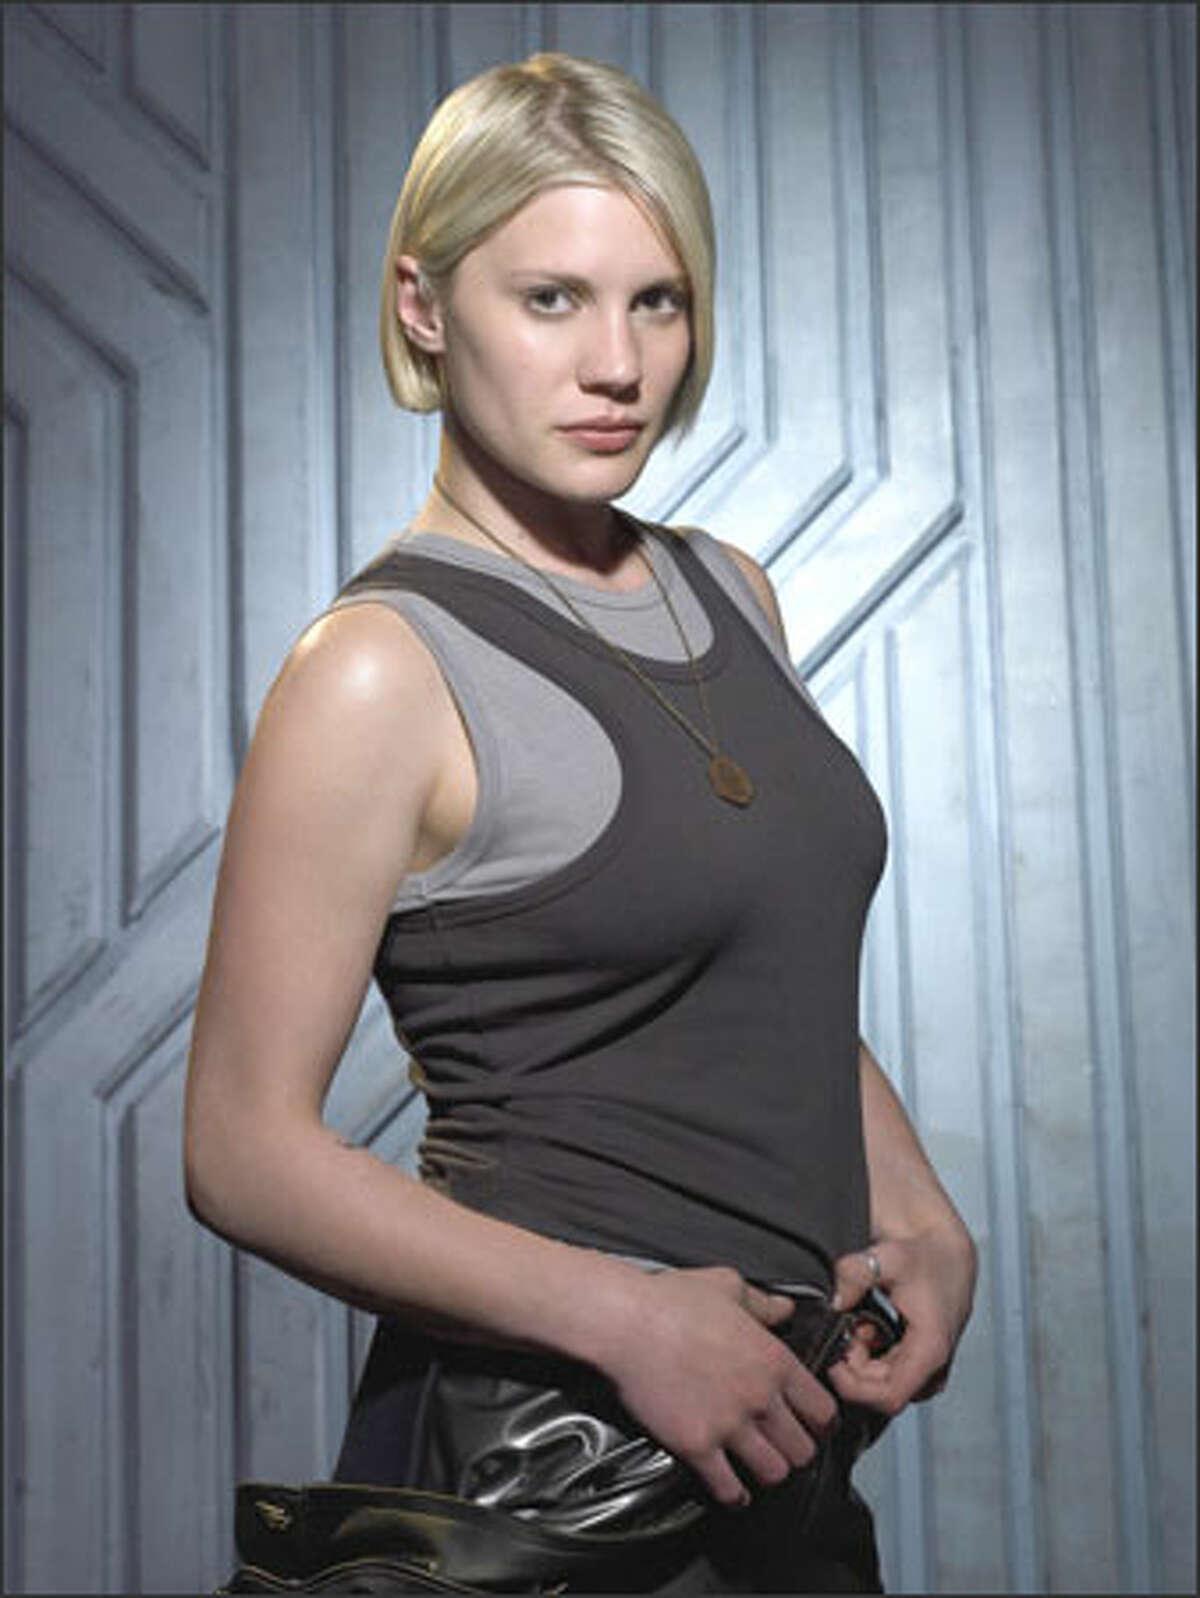 Starbuck (Katee Sackhoff) isn't your typical TV sex symbol.